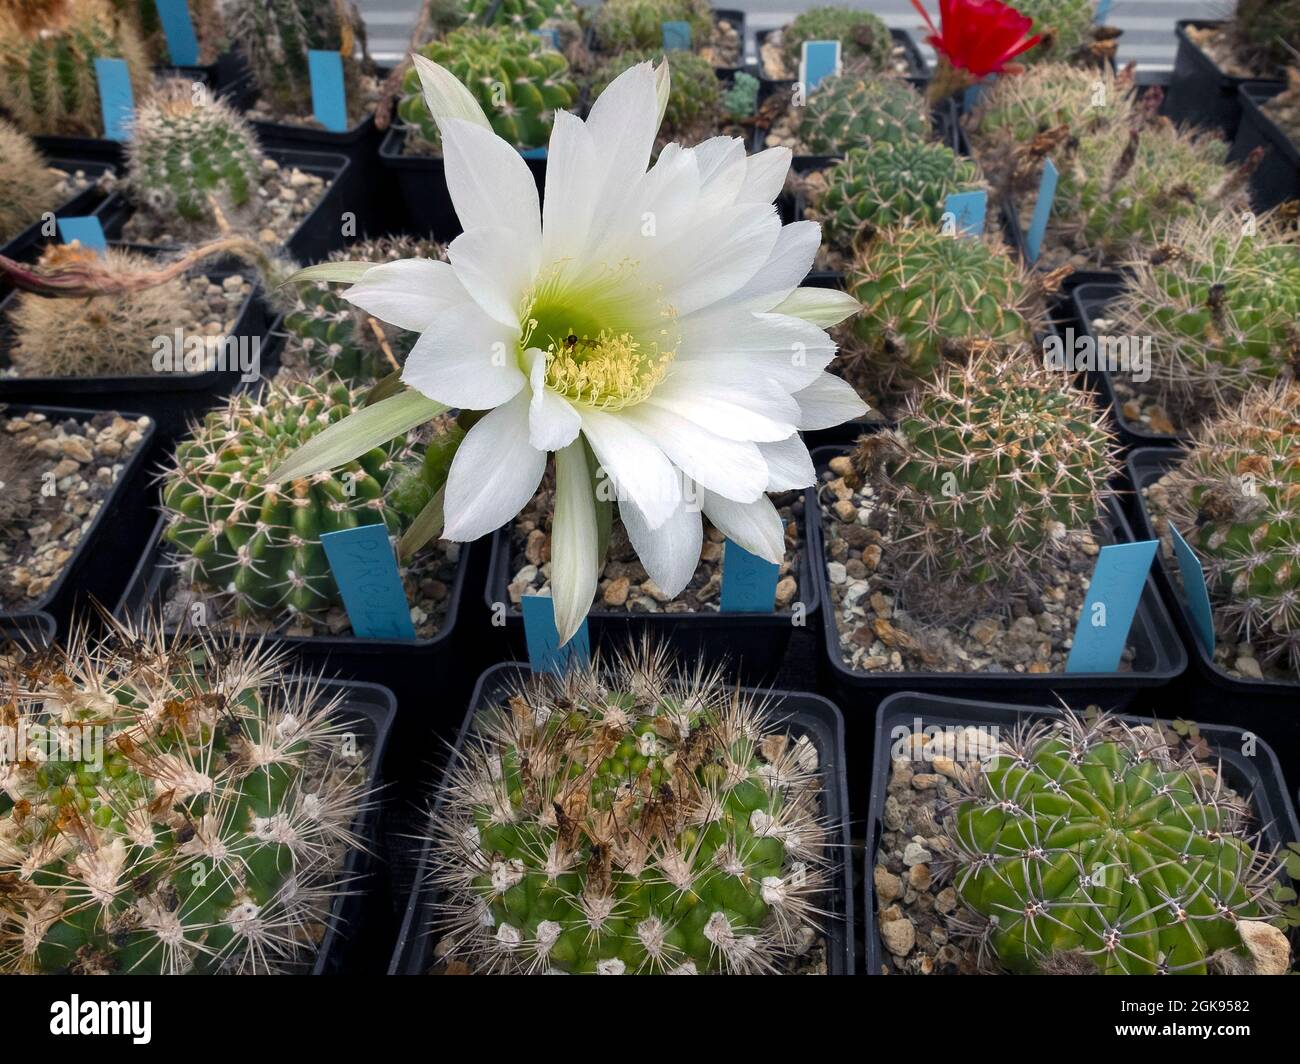 Cultivation of cactusses in a greenhouse of the Botanical Garden, Germany, Hamburg-Flottbek Stock Photo